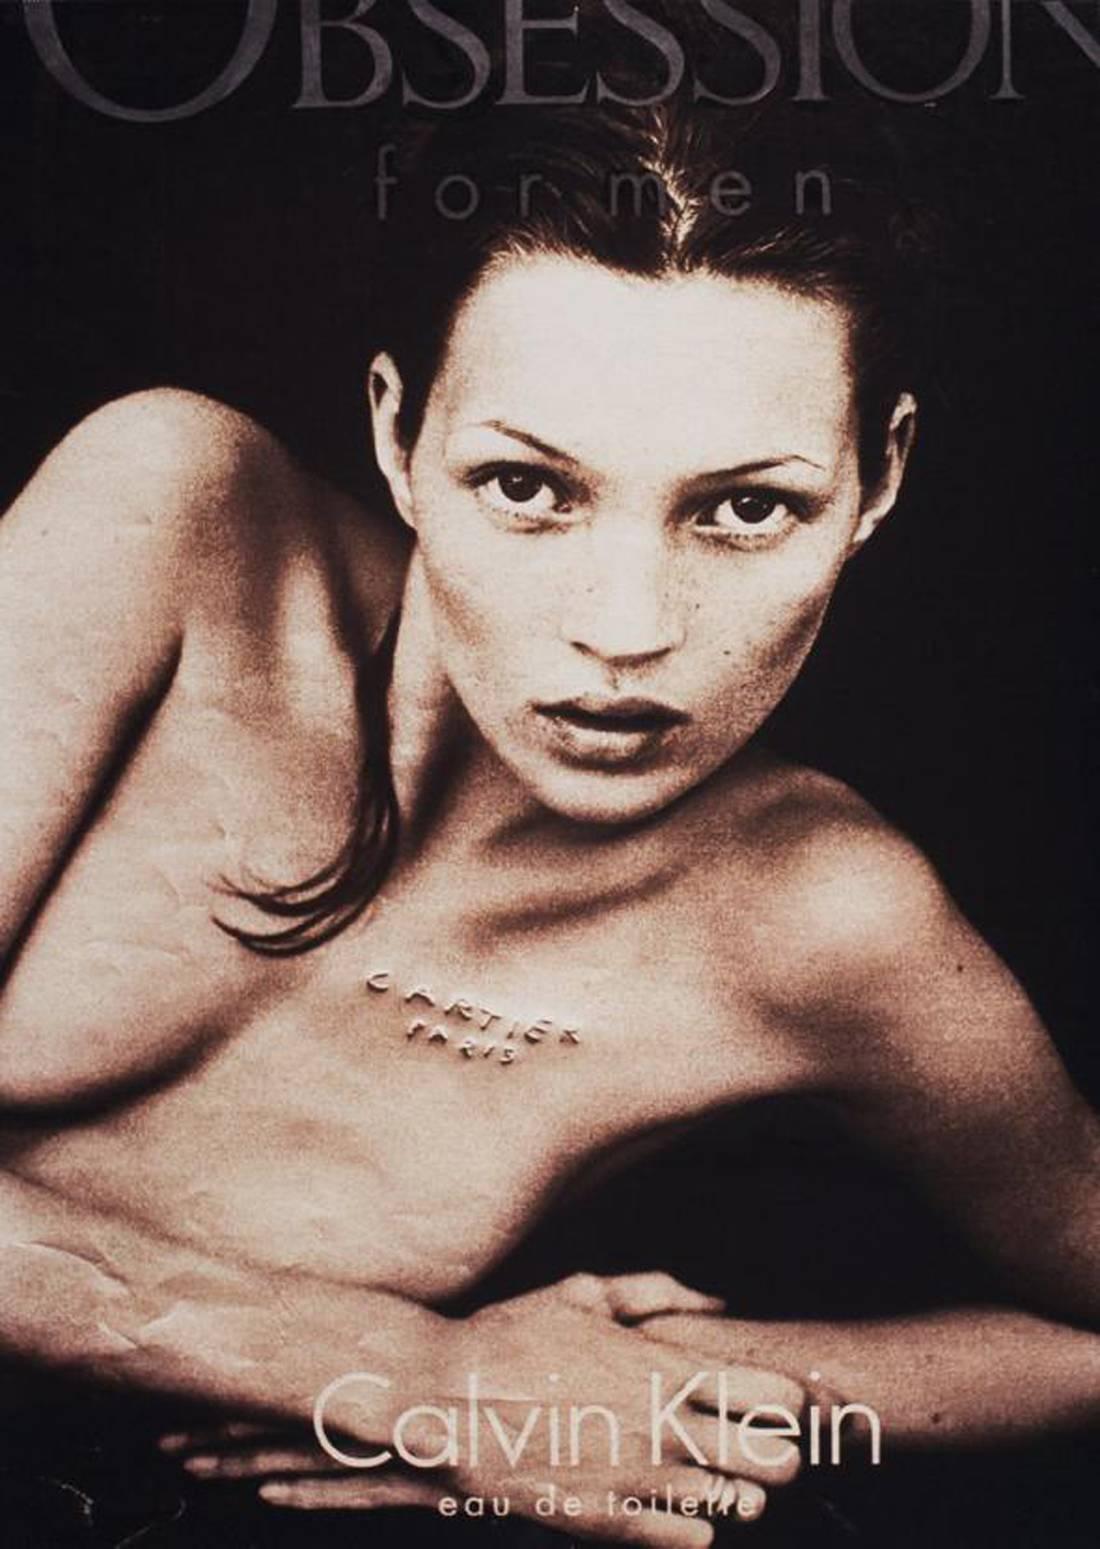 Daniele Buetti Nude Photograph - Calvin Klein (Looking For Love), Kate Moss, Contemporary Art, 21st Century